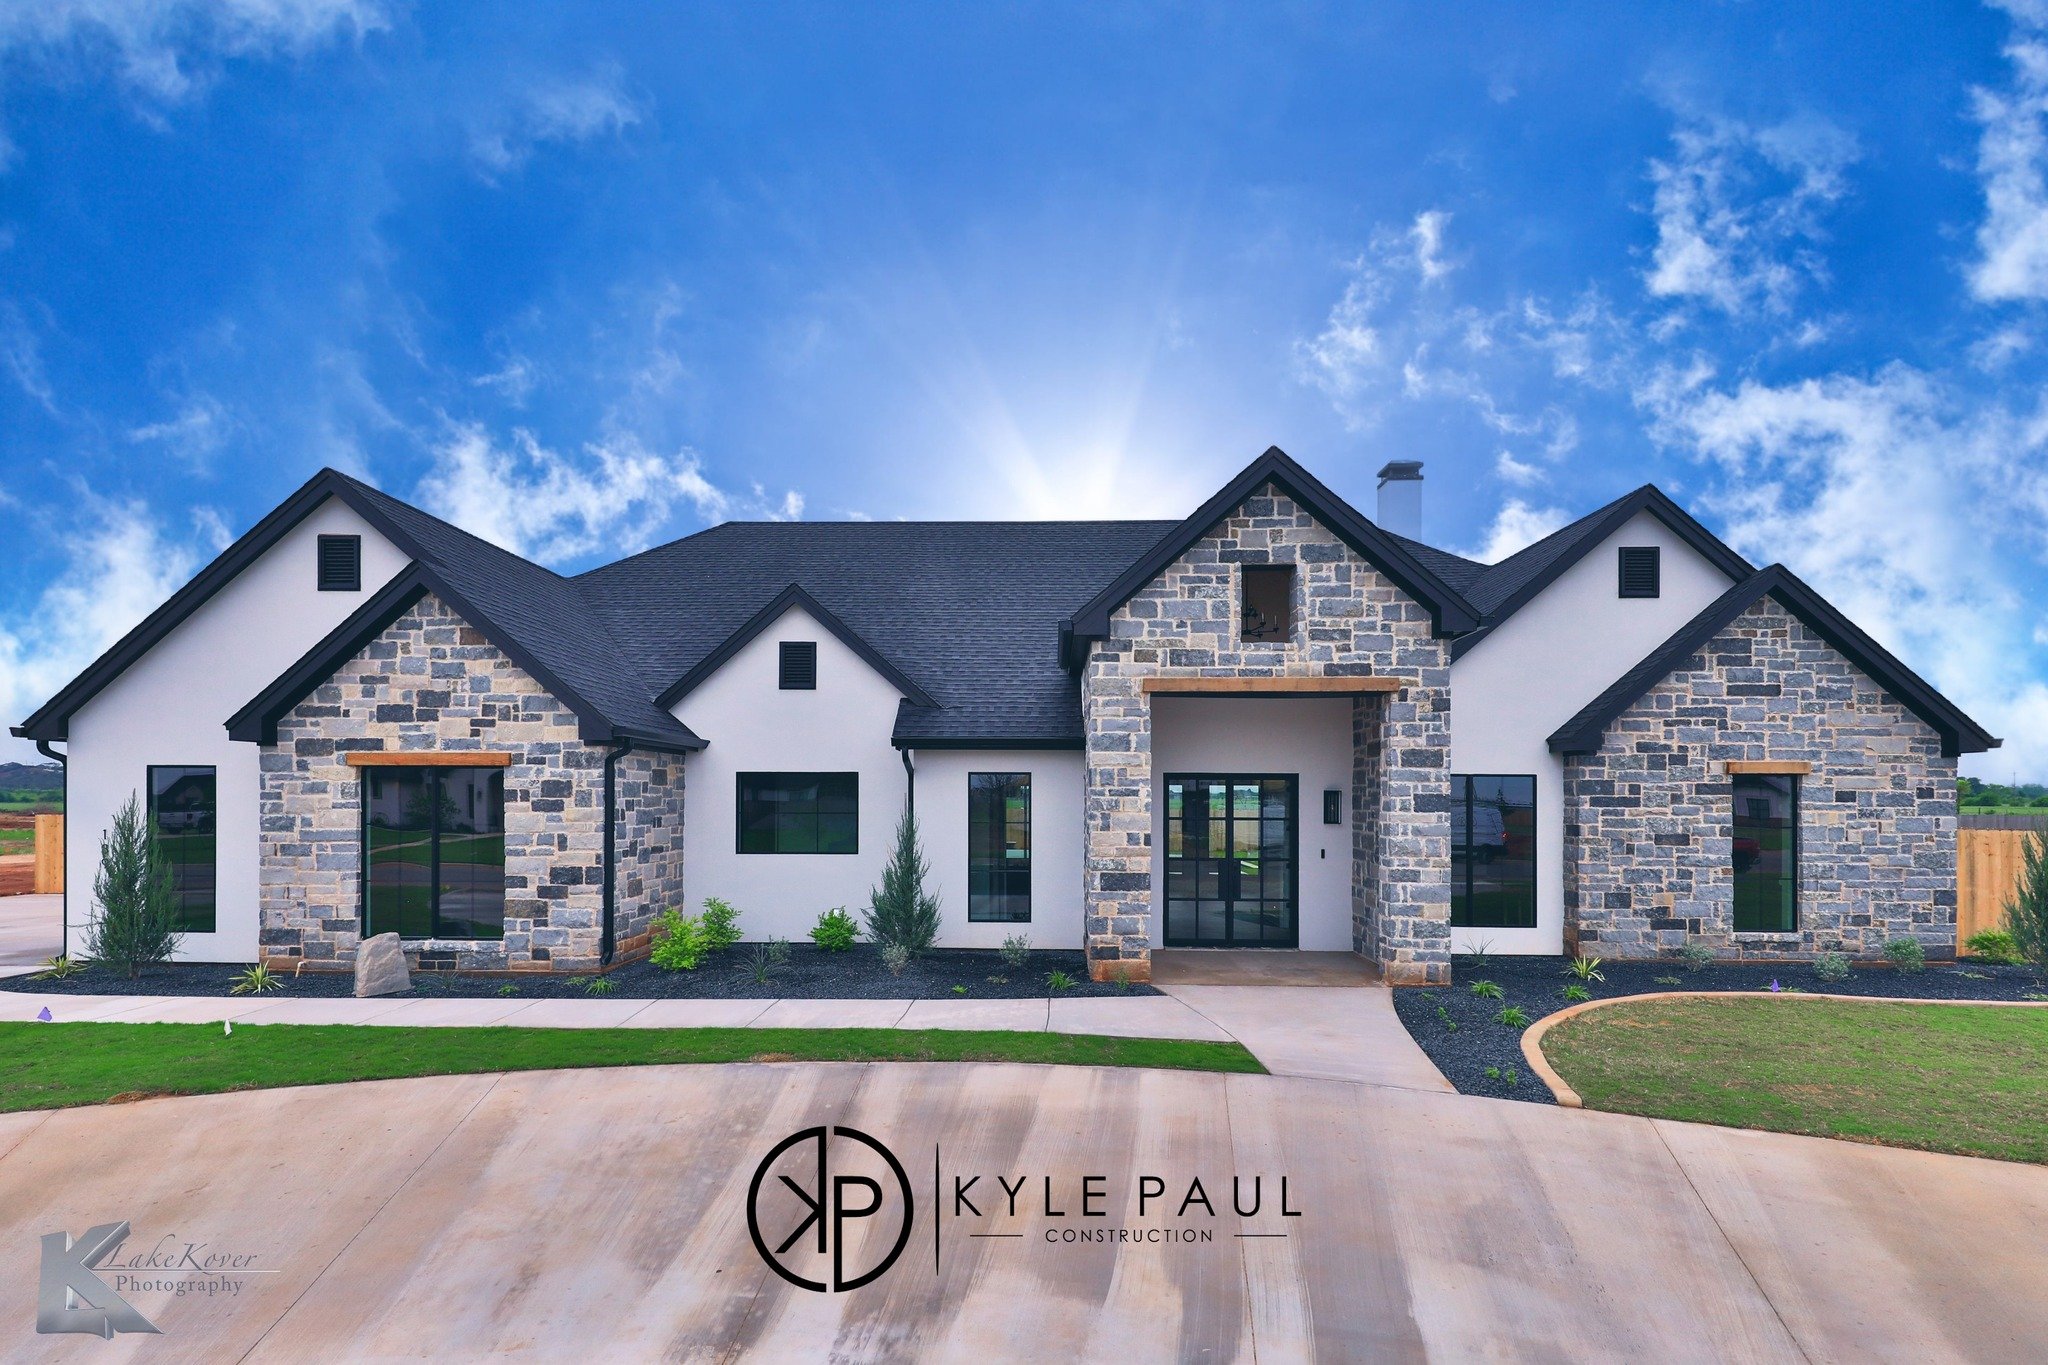 | R E V E A L | Meet Gainesway V. From the very first conversations with the homeowners, it was clear they envisioned a space that seamlessly blended modern design with timeless elegance.  The result is a home that stuns from the outside in, with cle